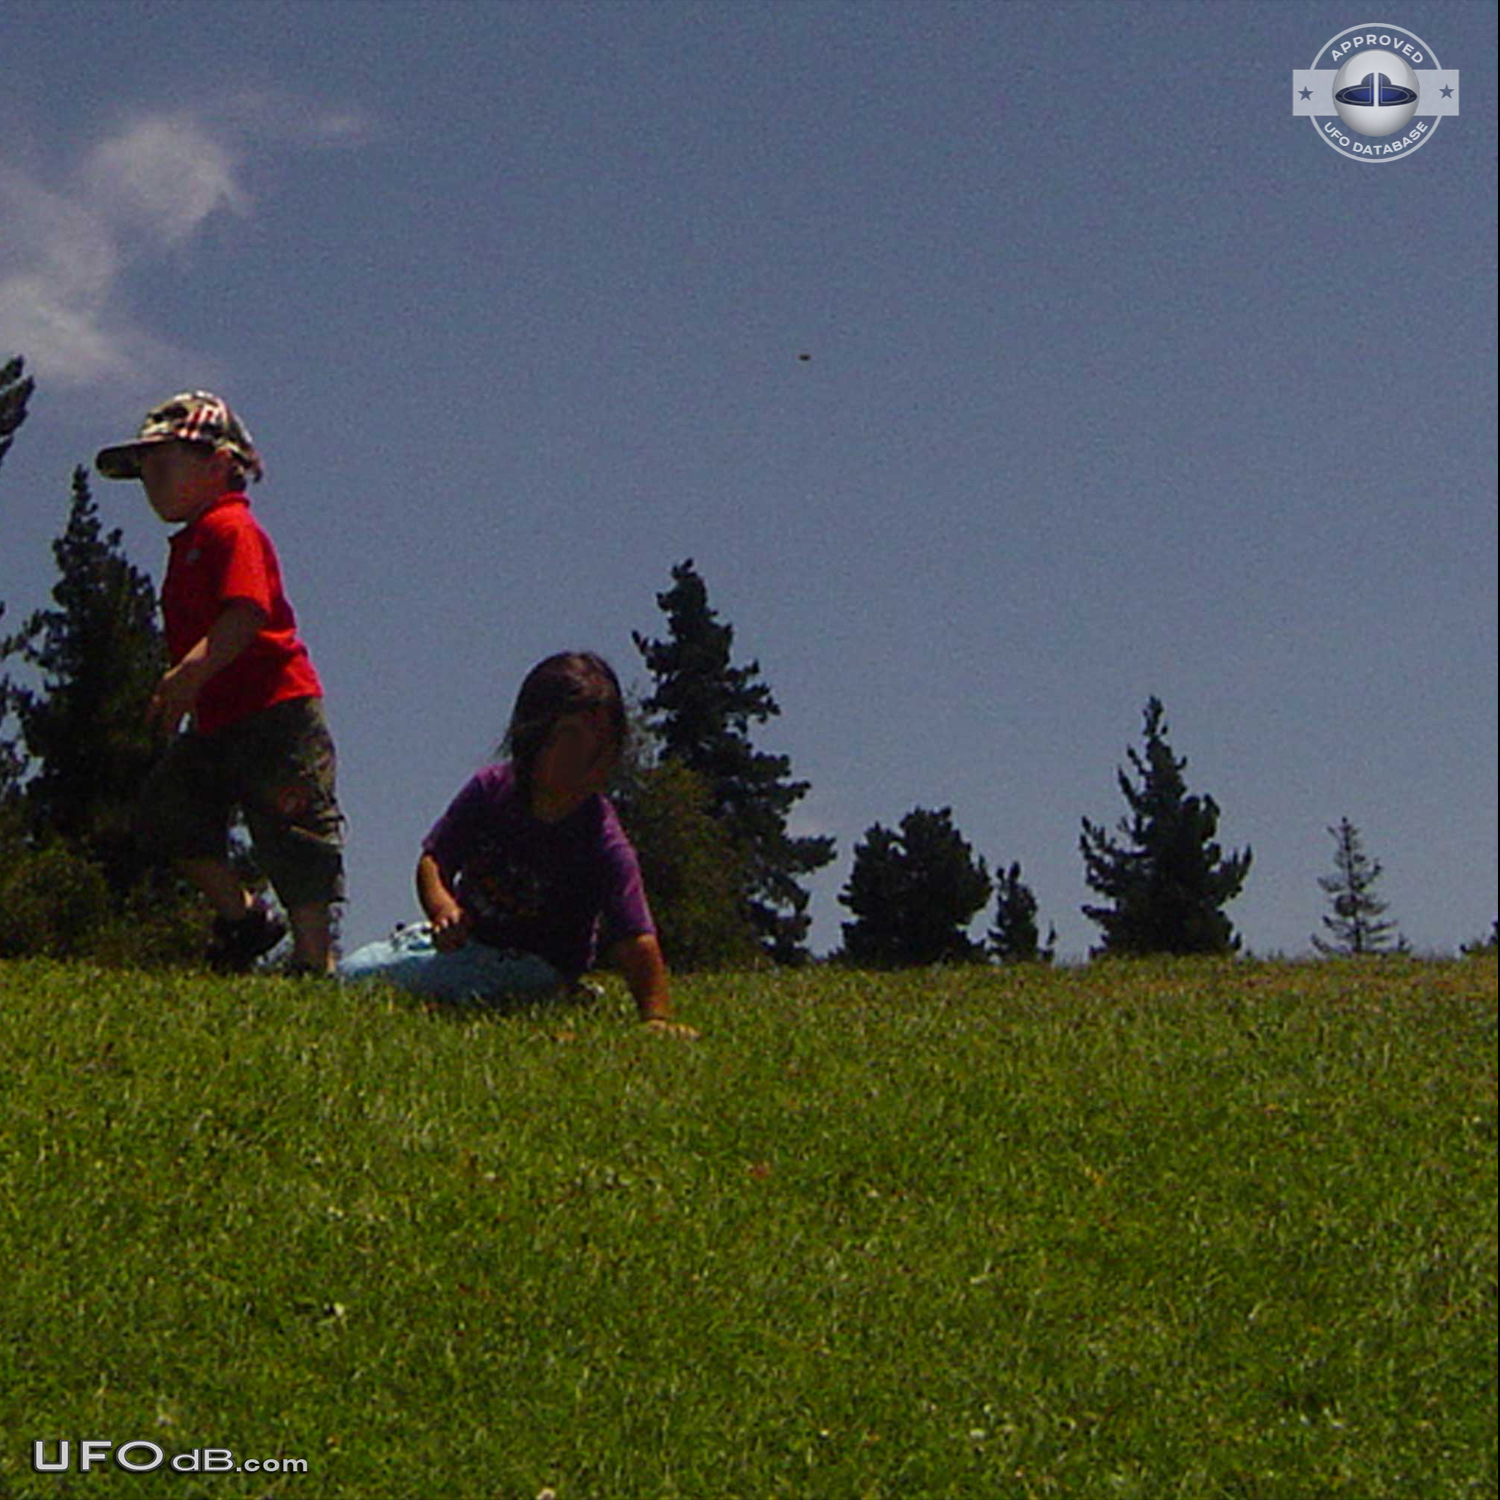 Kids picture captures a passing UFO in the sky of Cayo Chile in 2007 UFO Picture #435-1